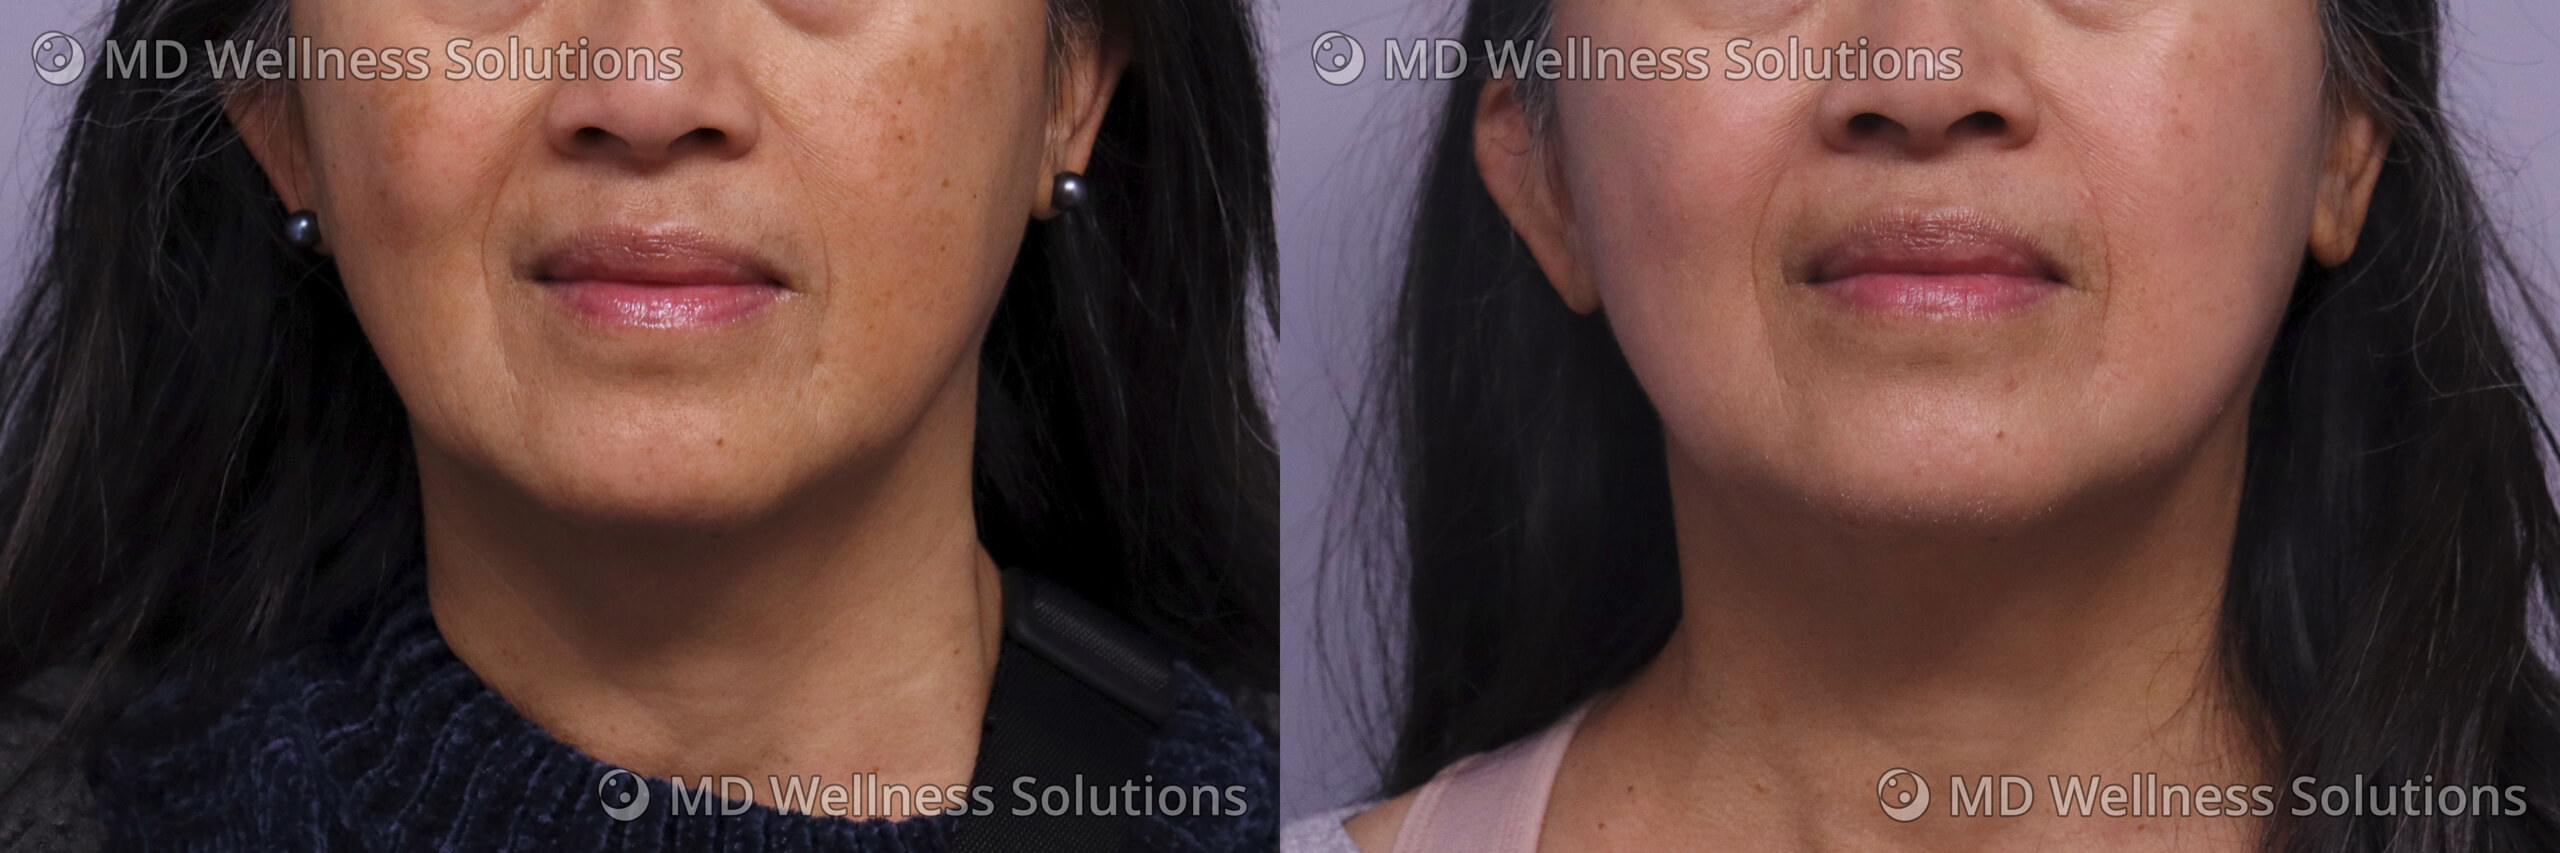 55-64 year old woman before and after skincare treatment